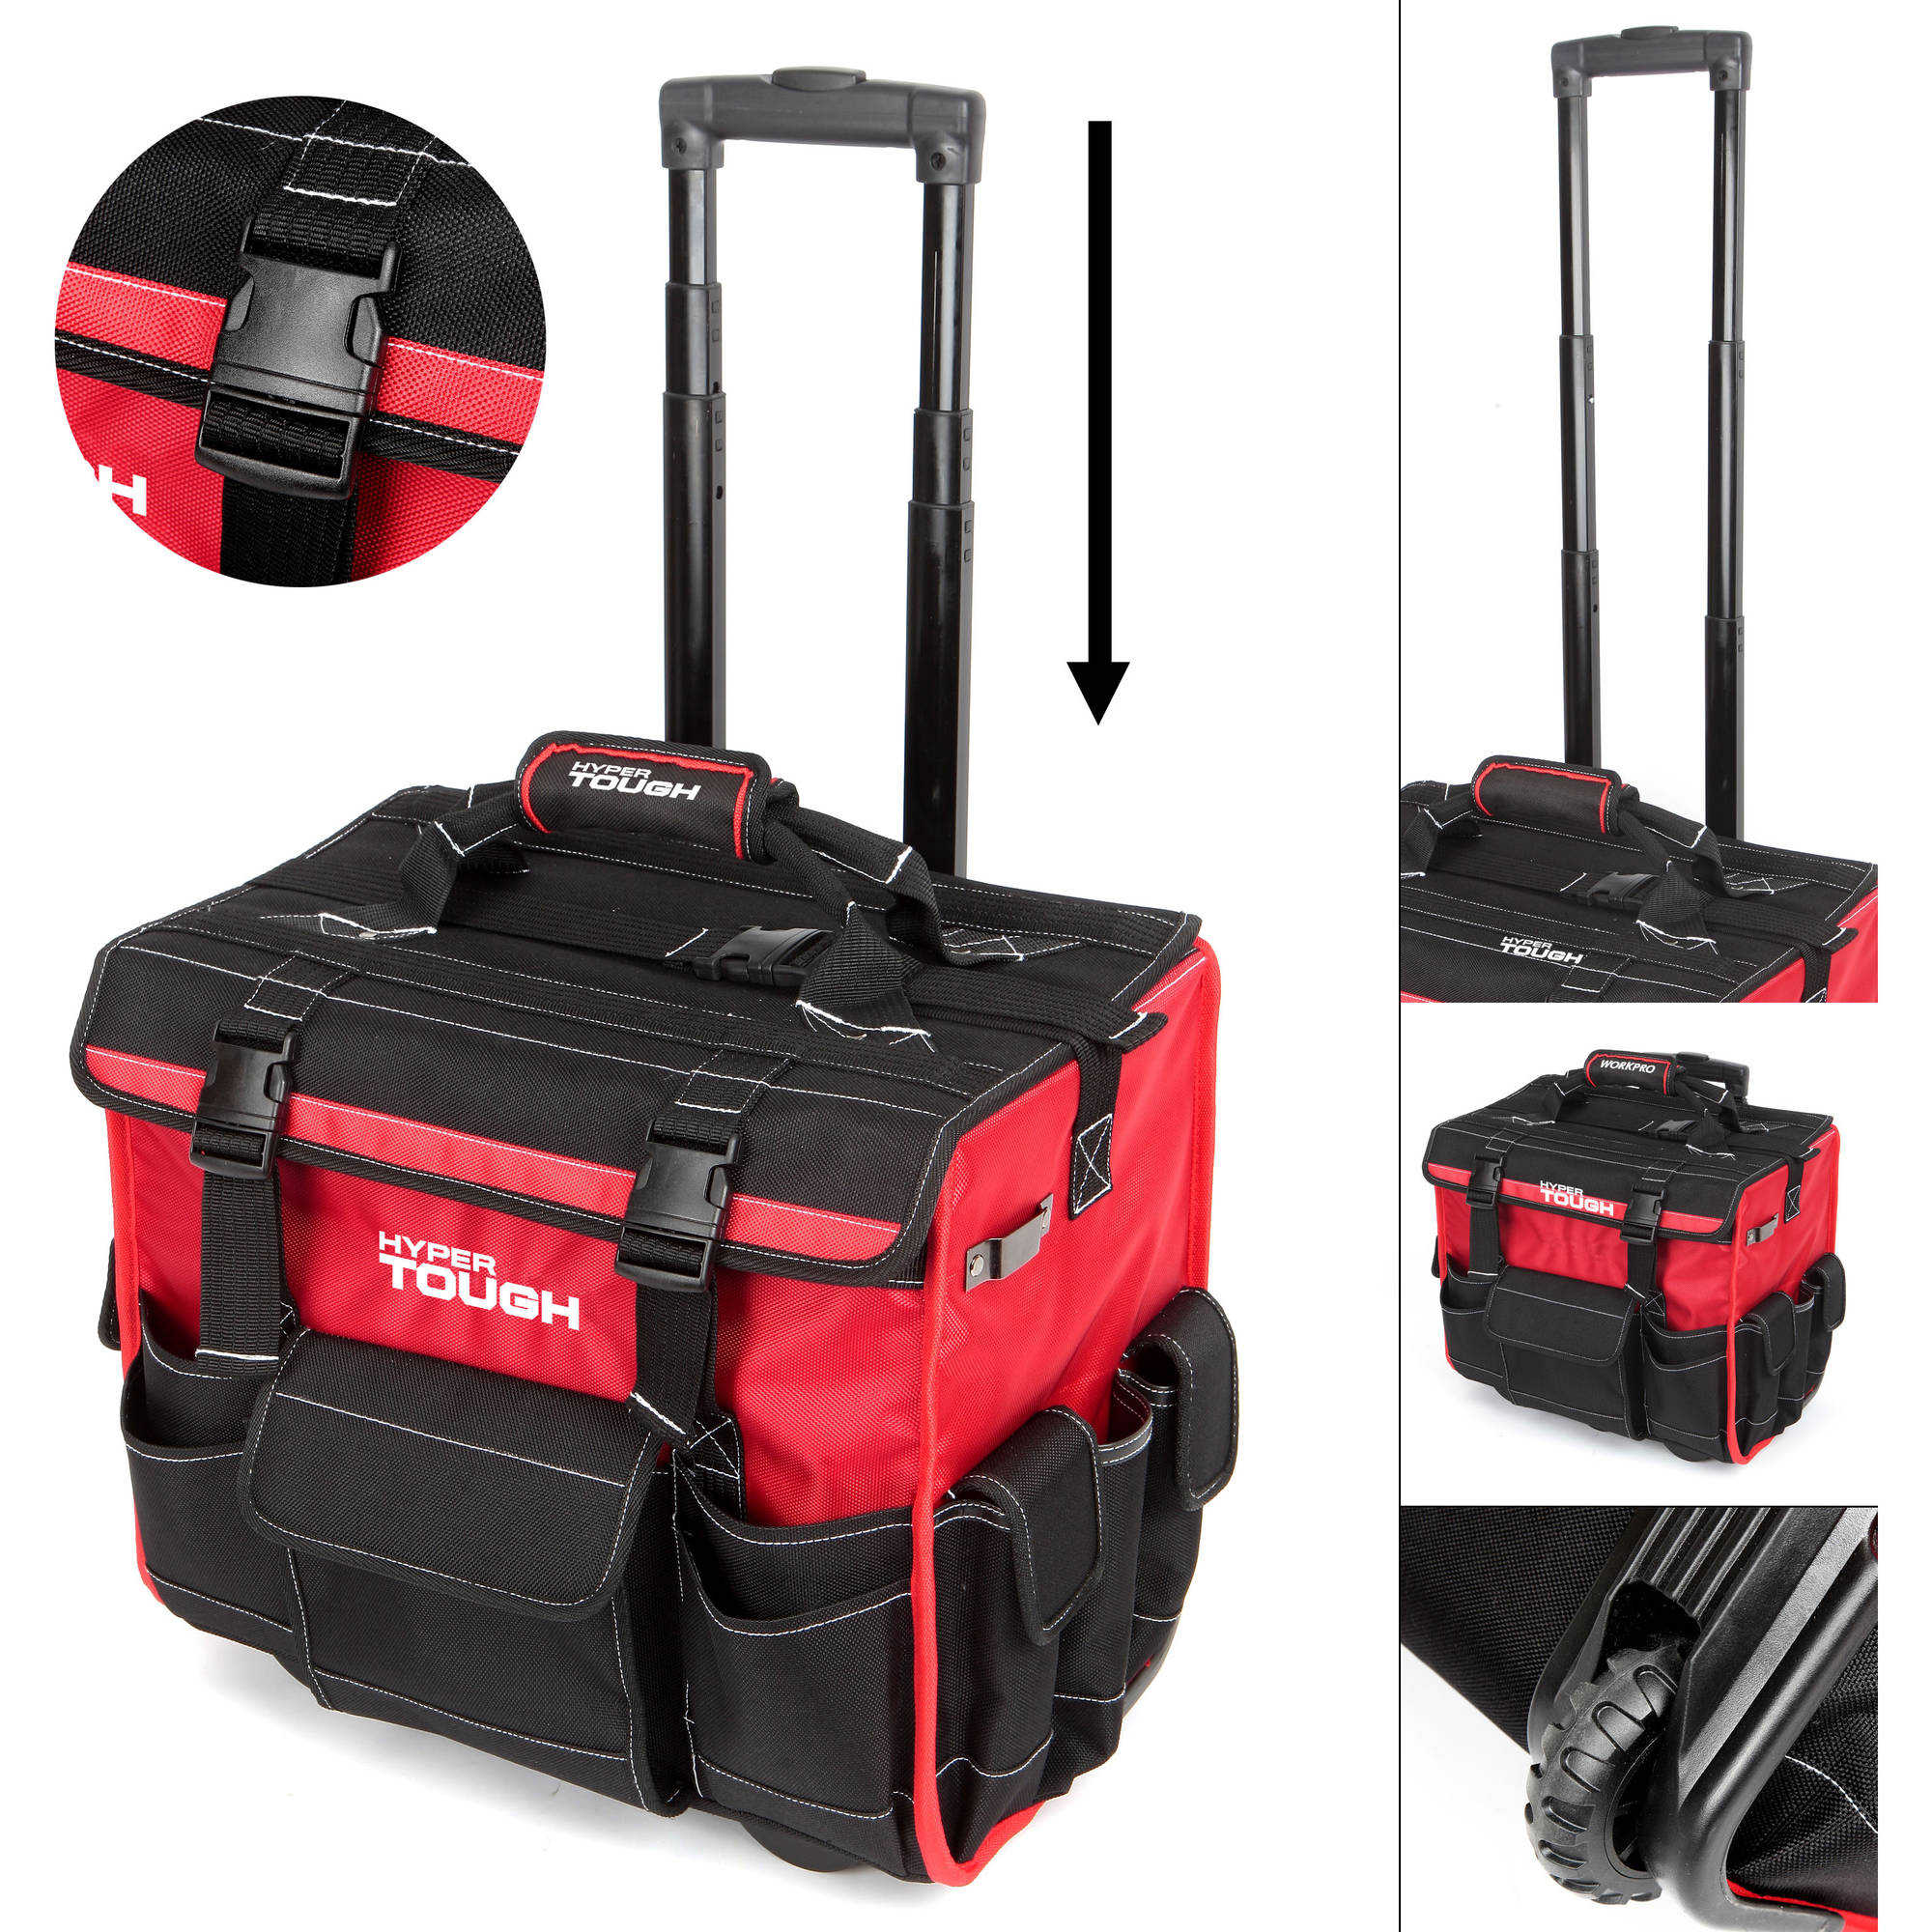 HyperTough 174-Piece Tool Set with Trolley Bag